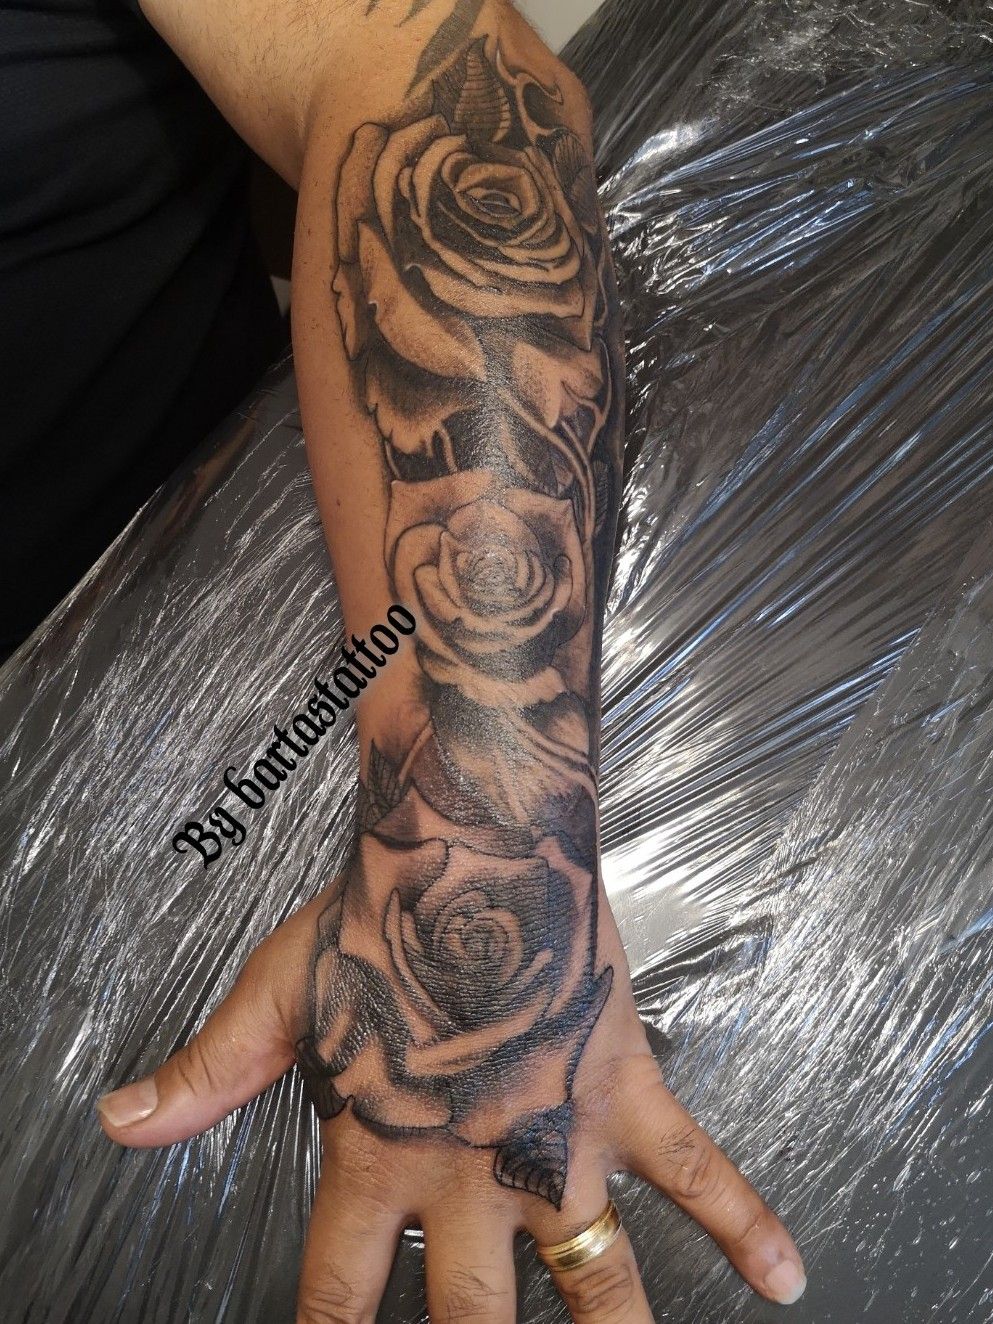 30 Best Half Sleeve Tattoos Ideas for Men and Women in 2023